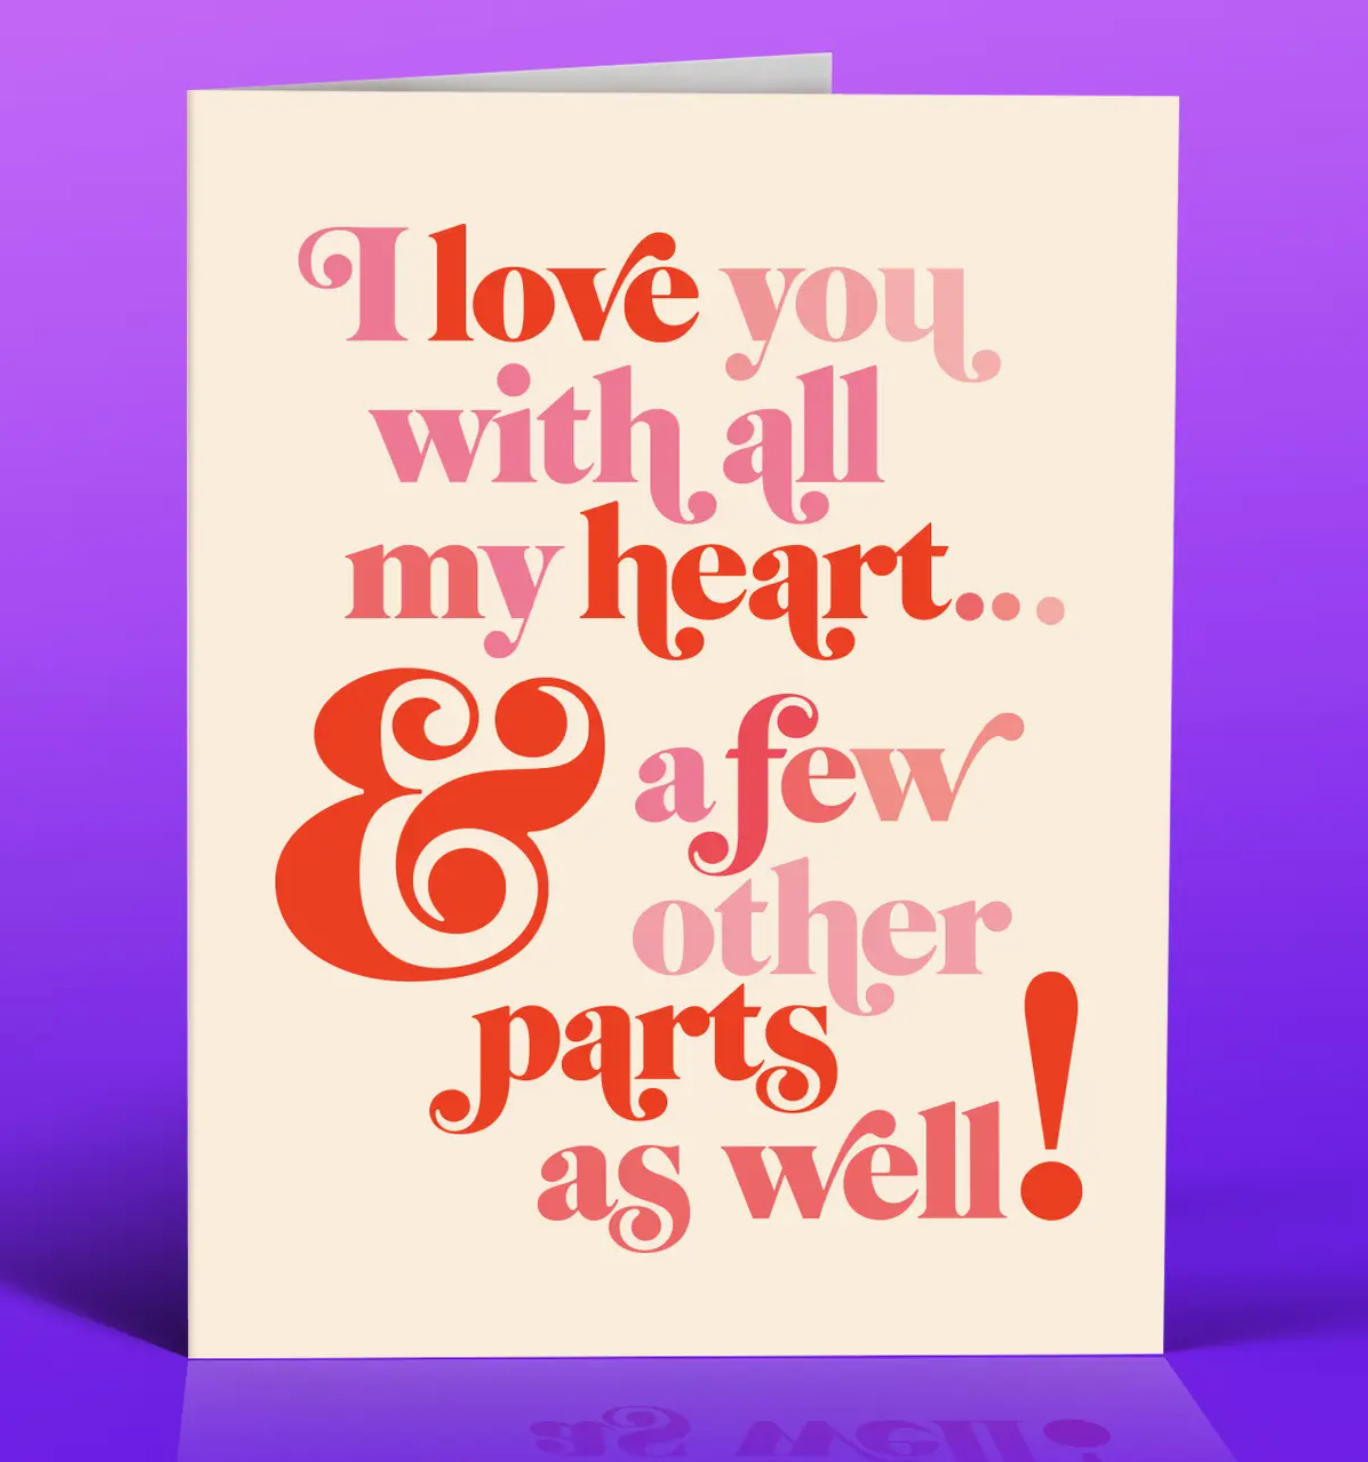 I Love You With All My Heart & A Few Other Parts As Well Card